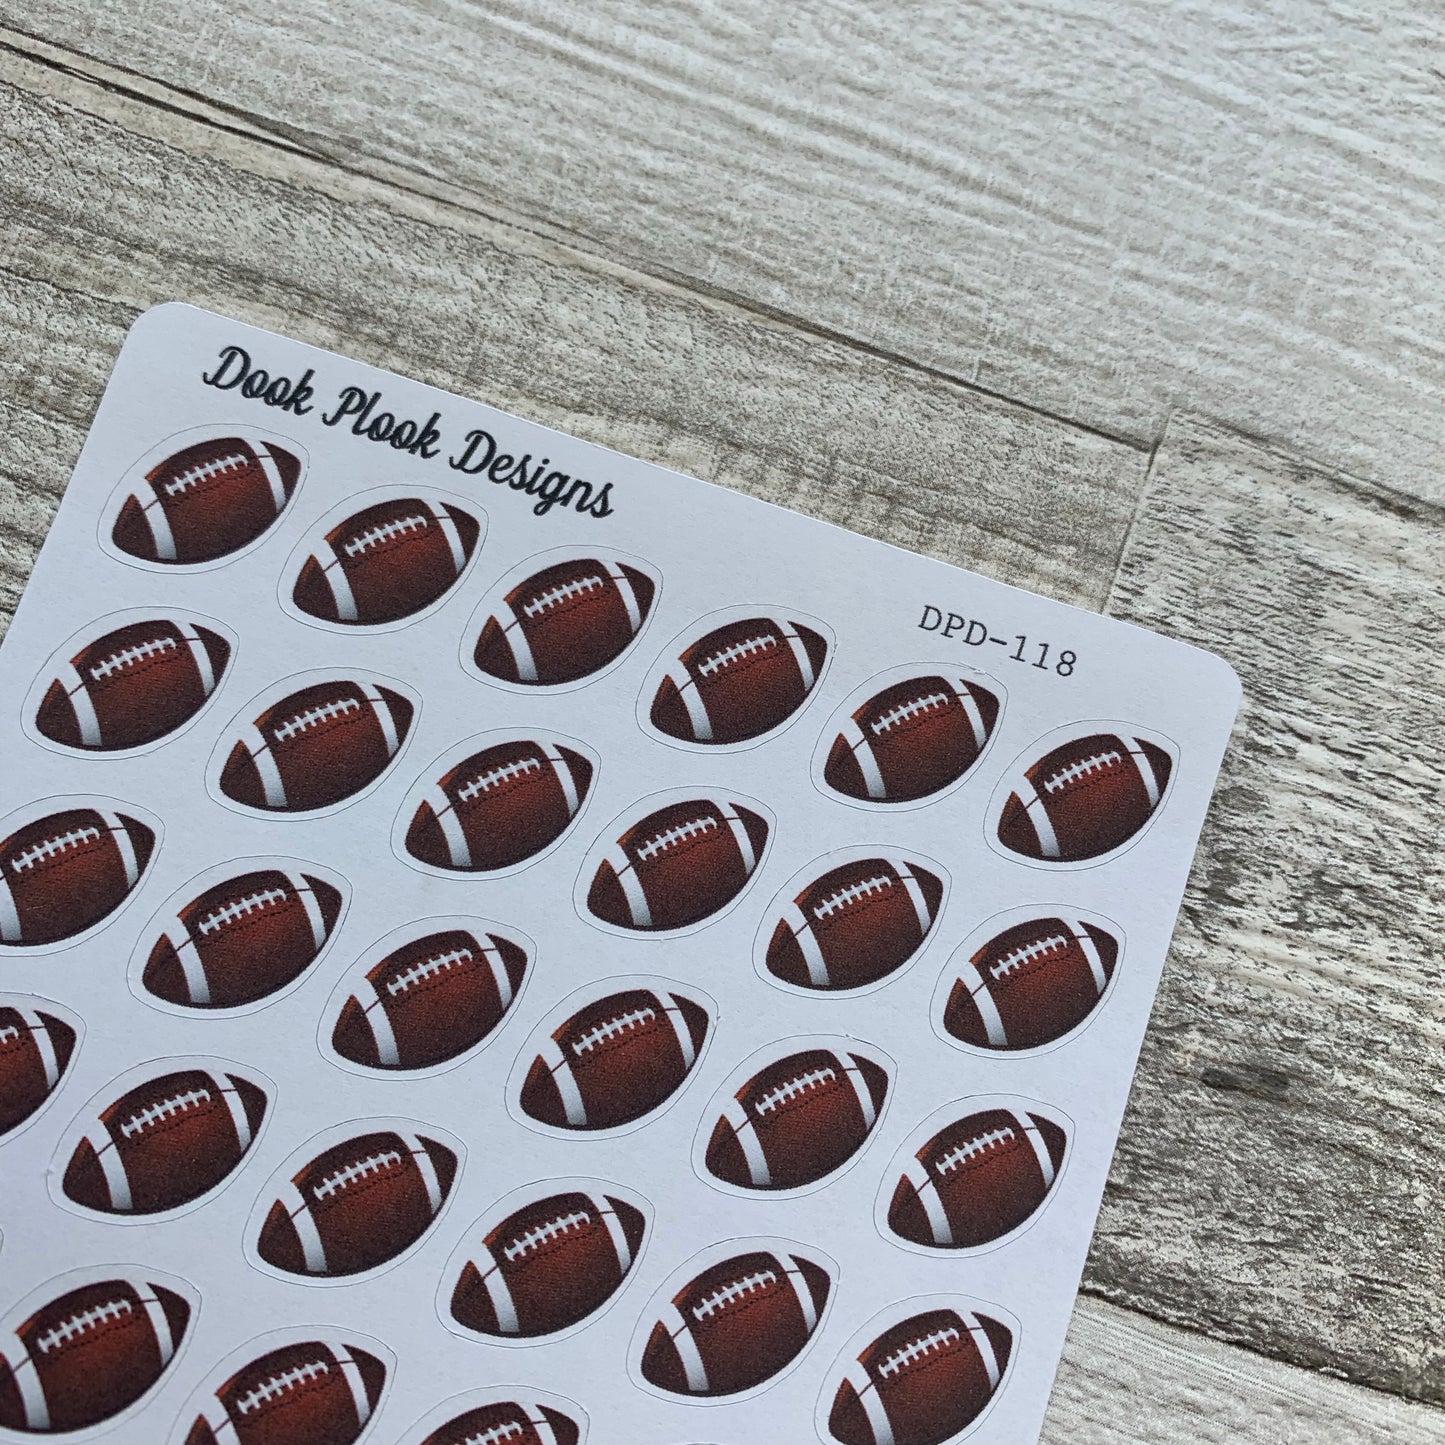 American Football stickers (DPD118)